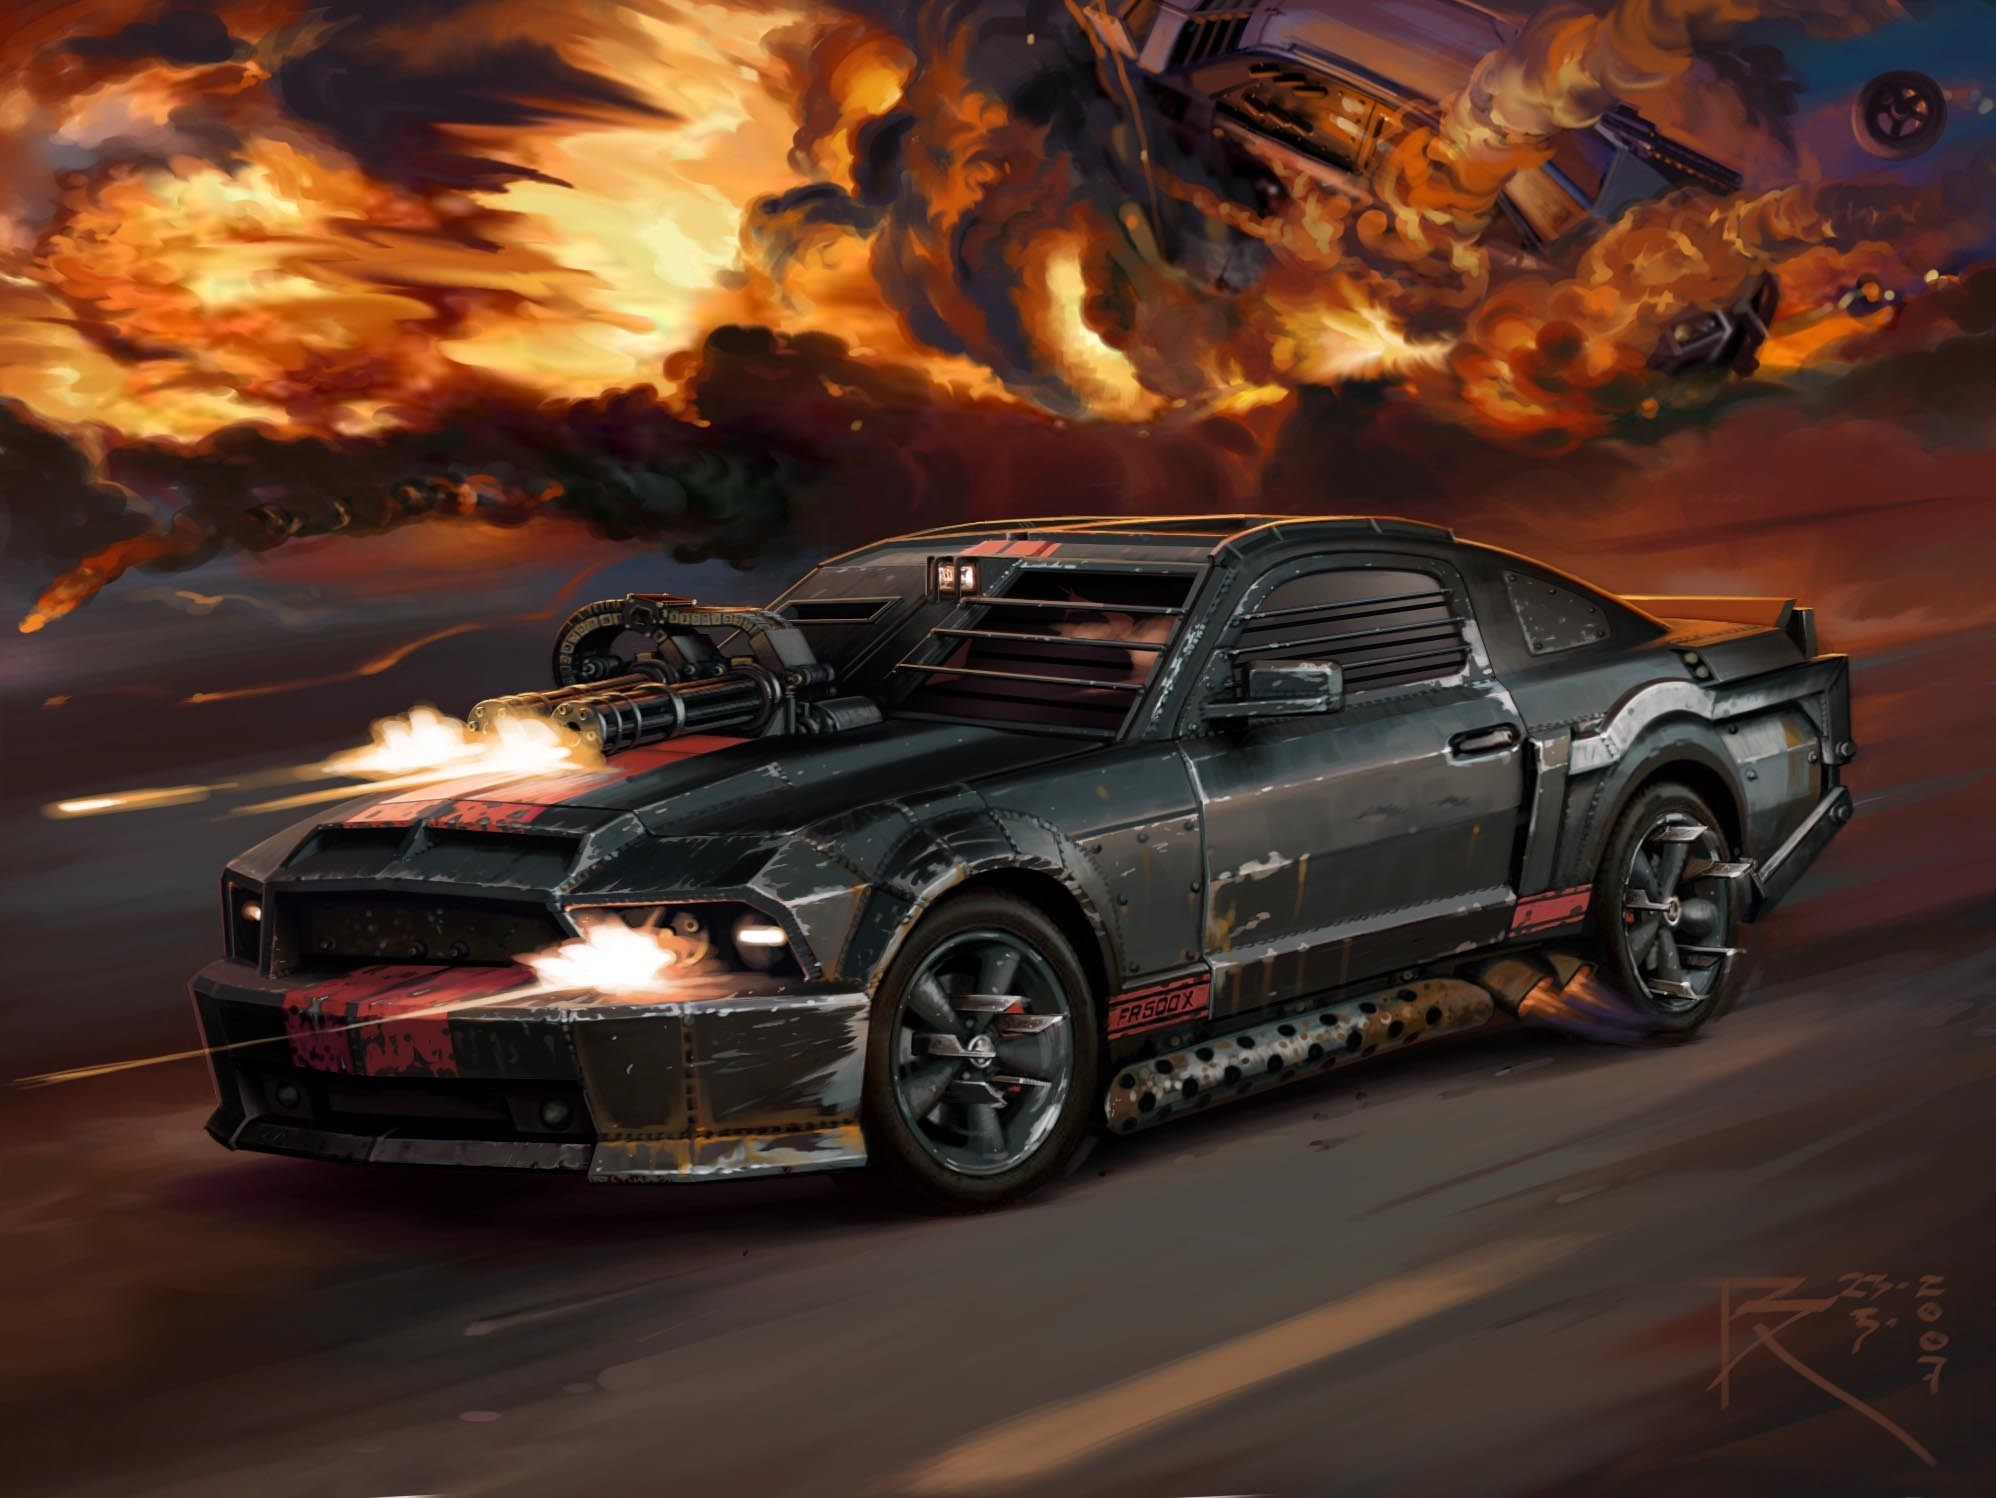 General 1996x1498 Death race car 2007 (Year) vehicle weapon fire explosion black cars artwork Ford Mustang S-197 Ford Mustang Ford digital art watermarked